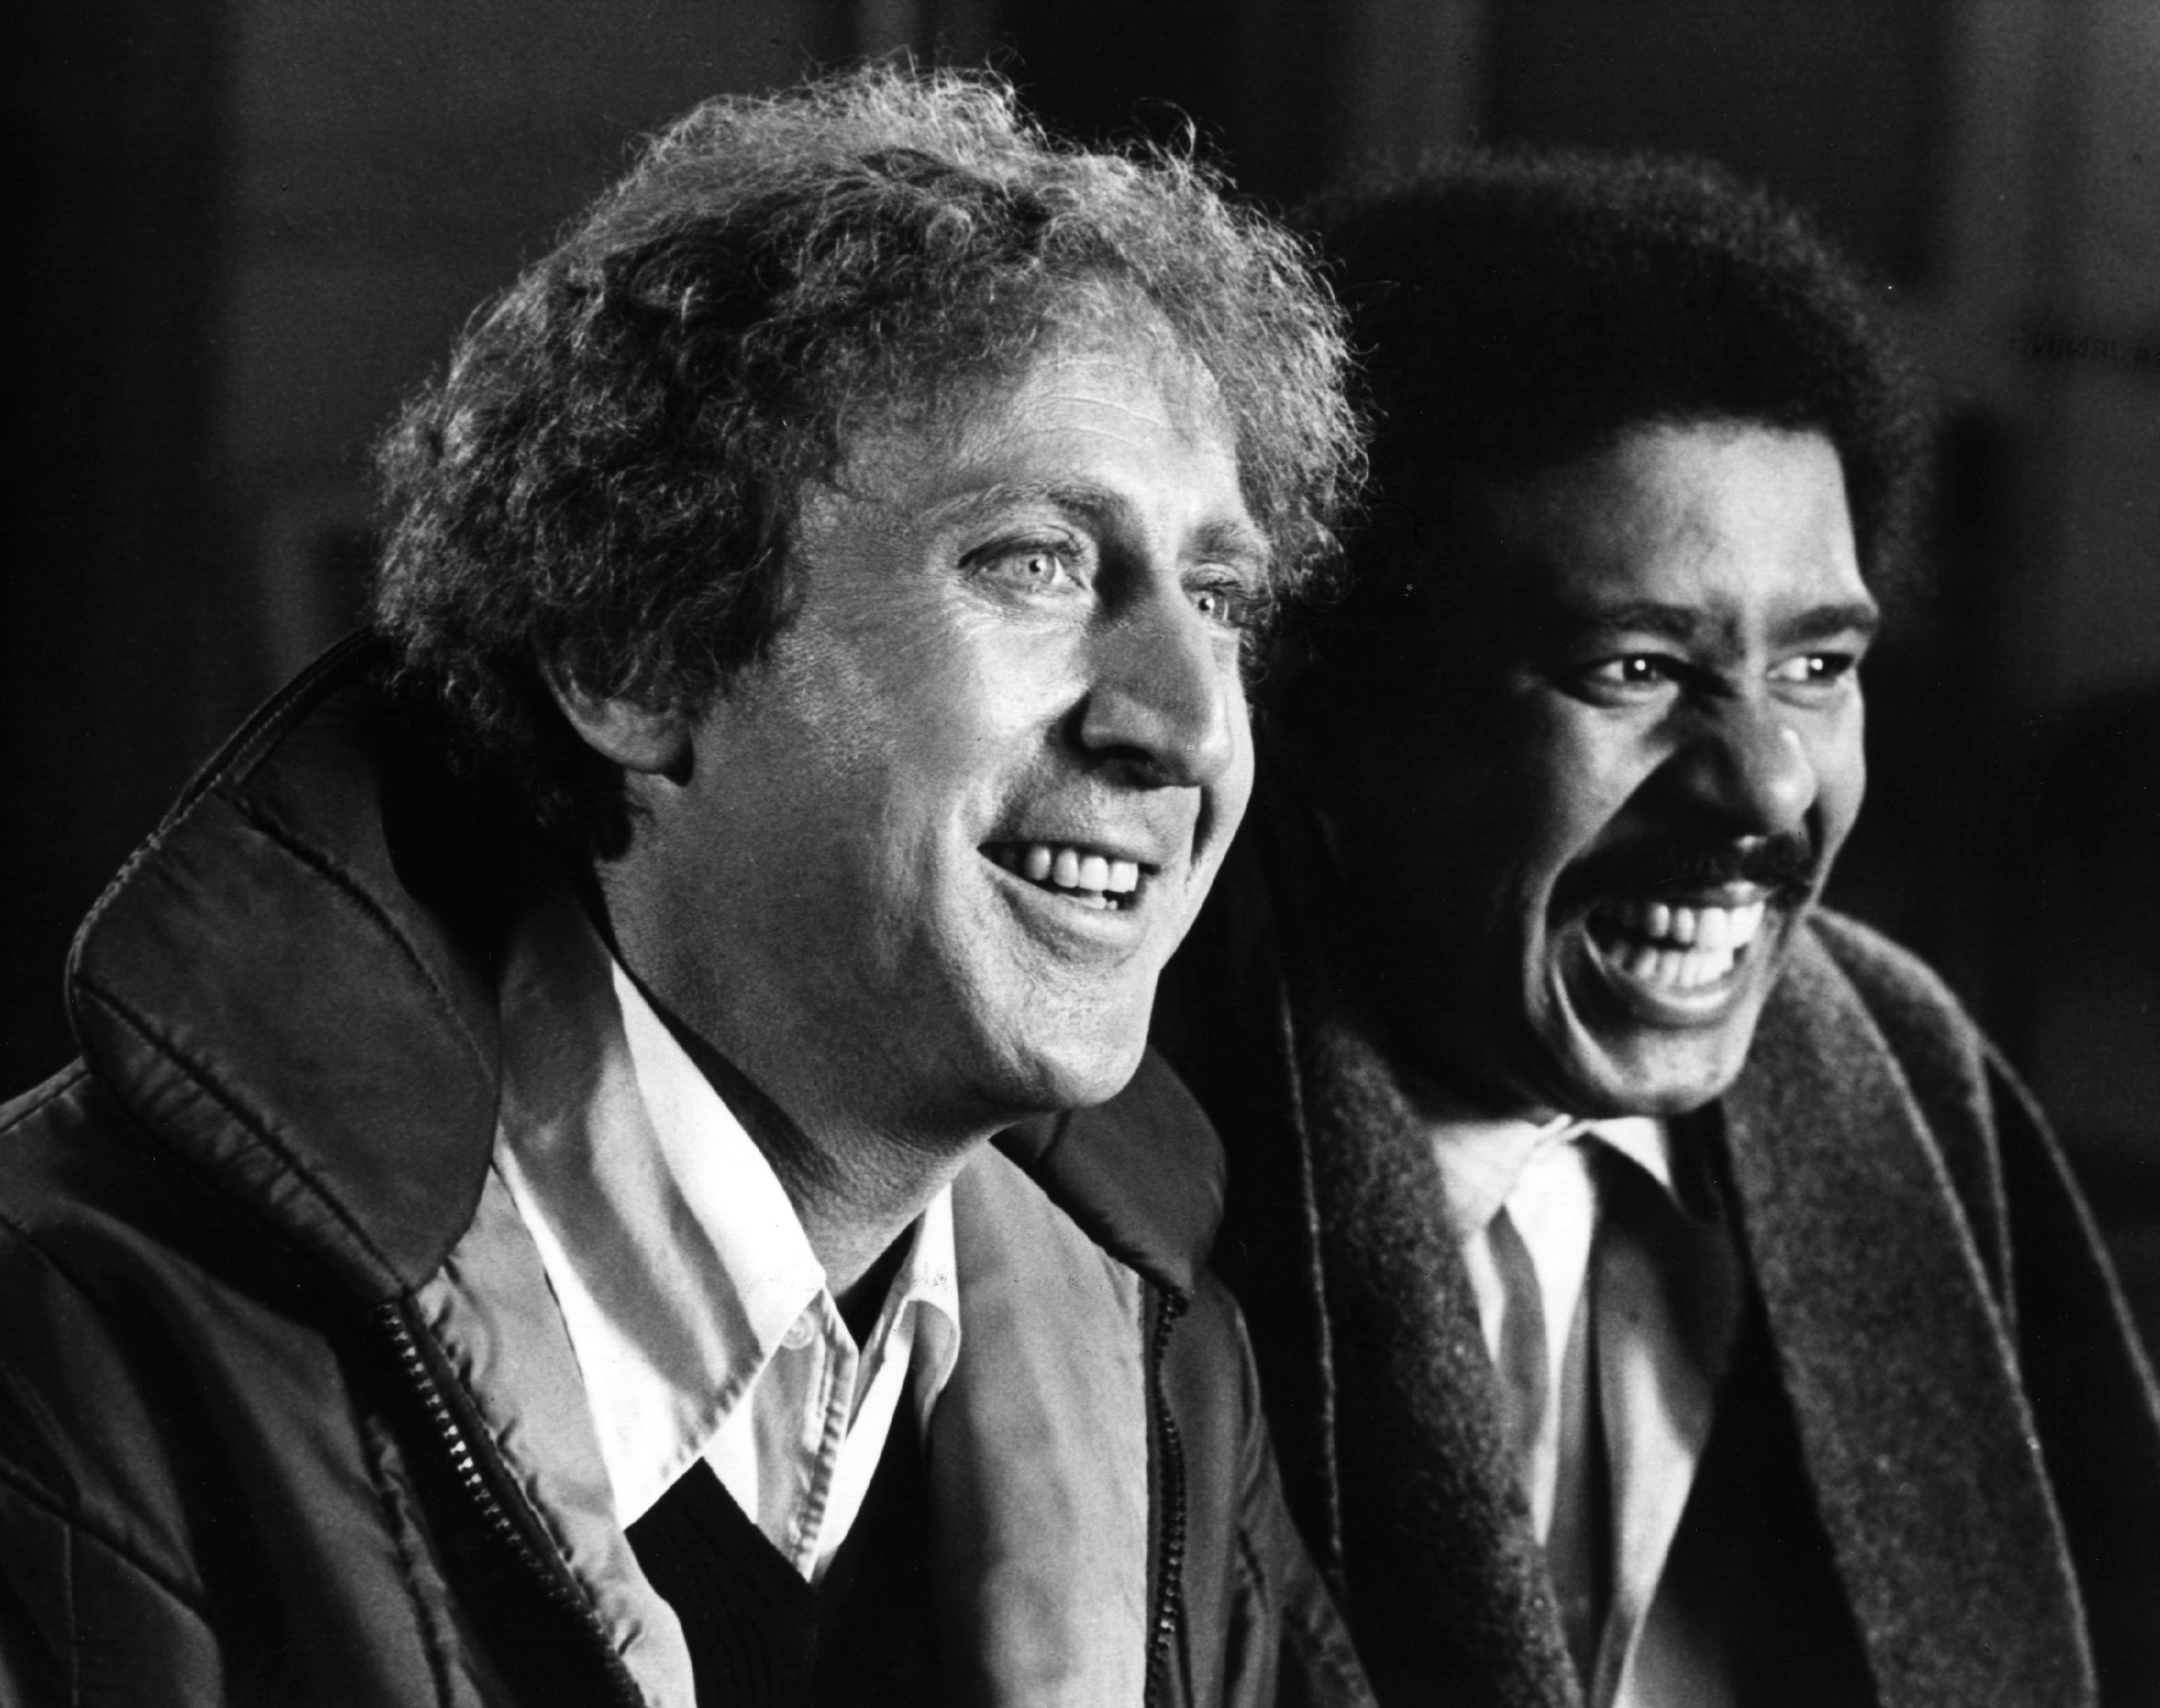 Late actors Richard Pryor and Gene Wilder | Photo: Getty images